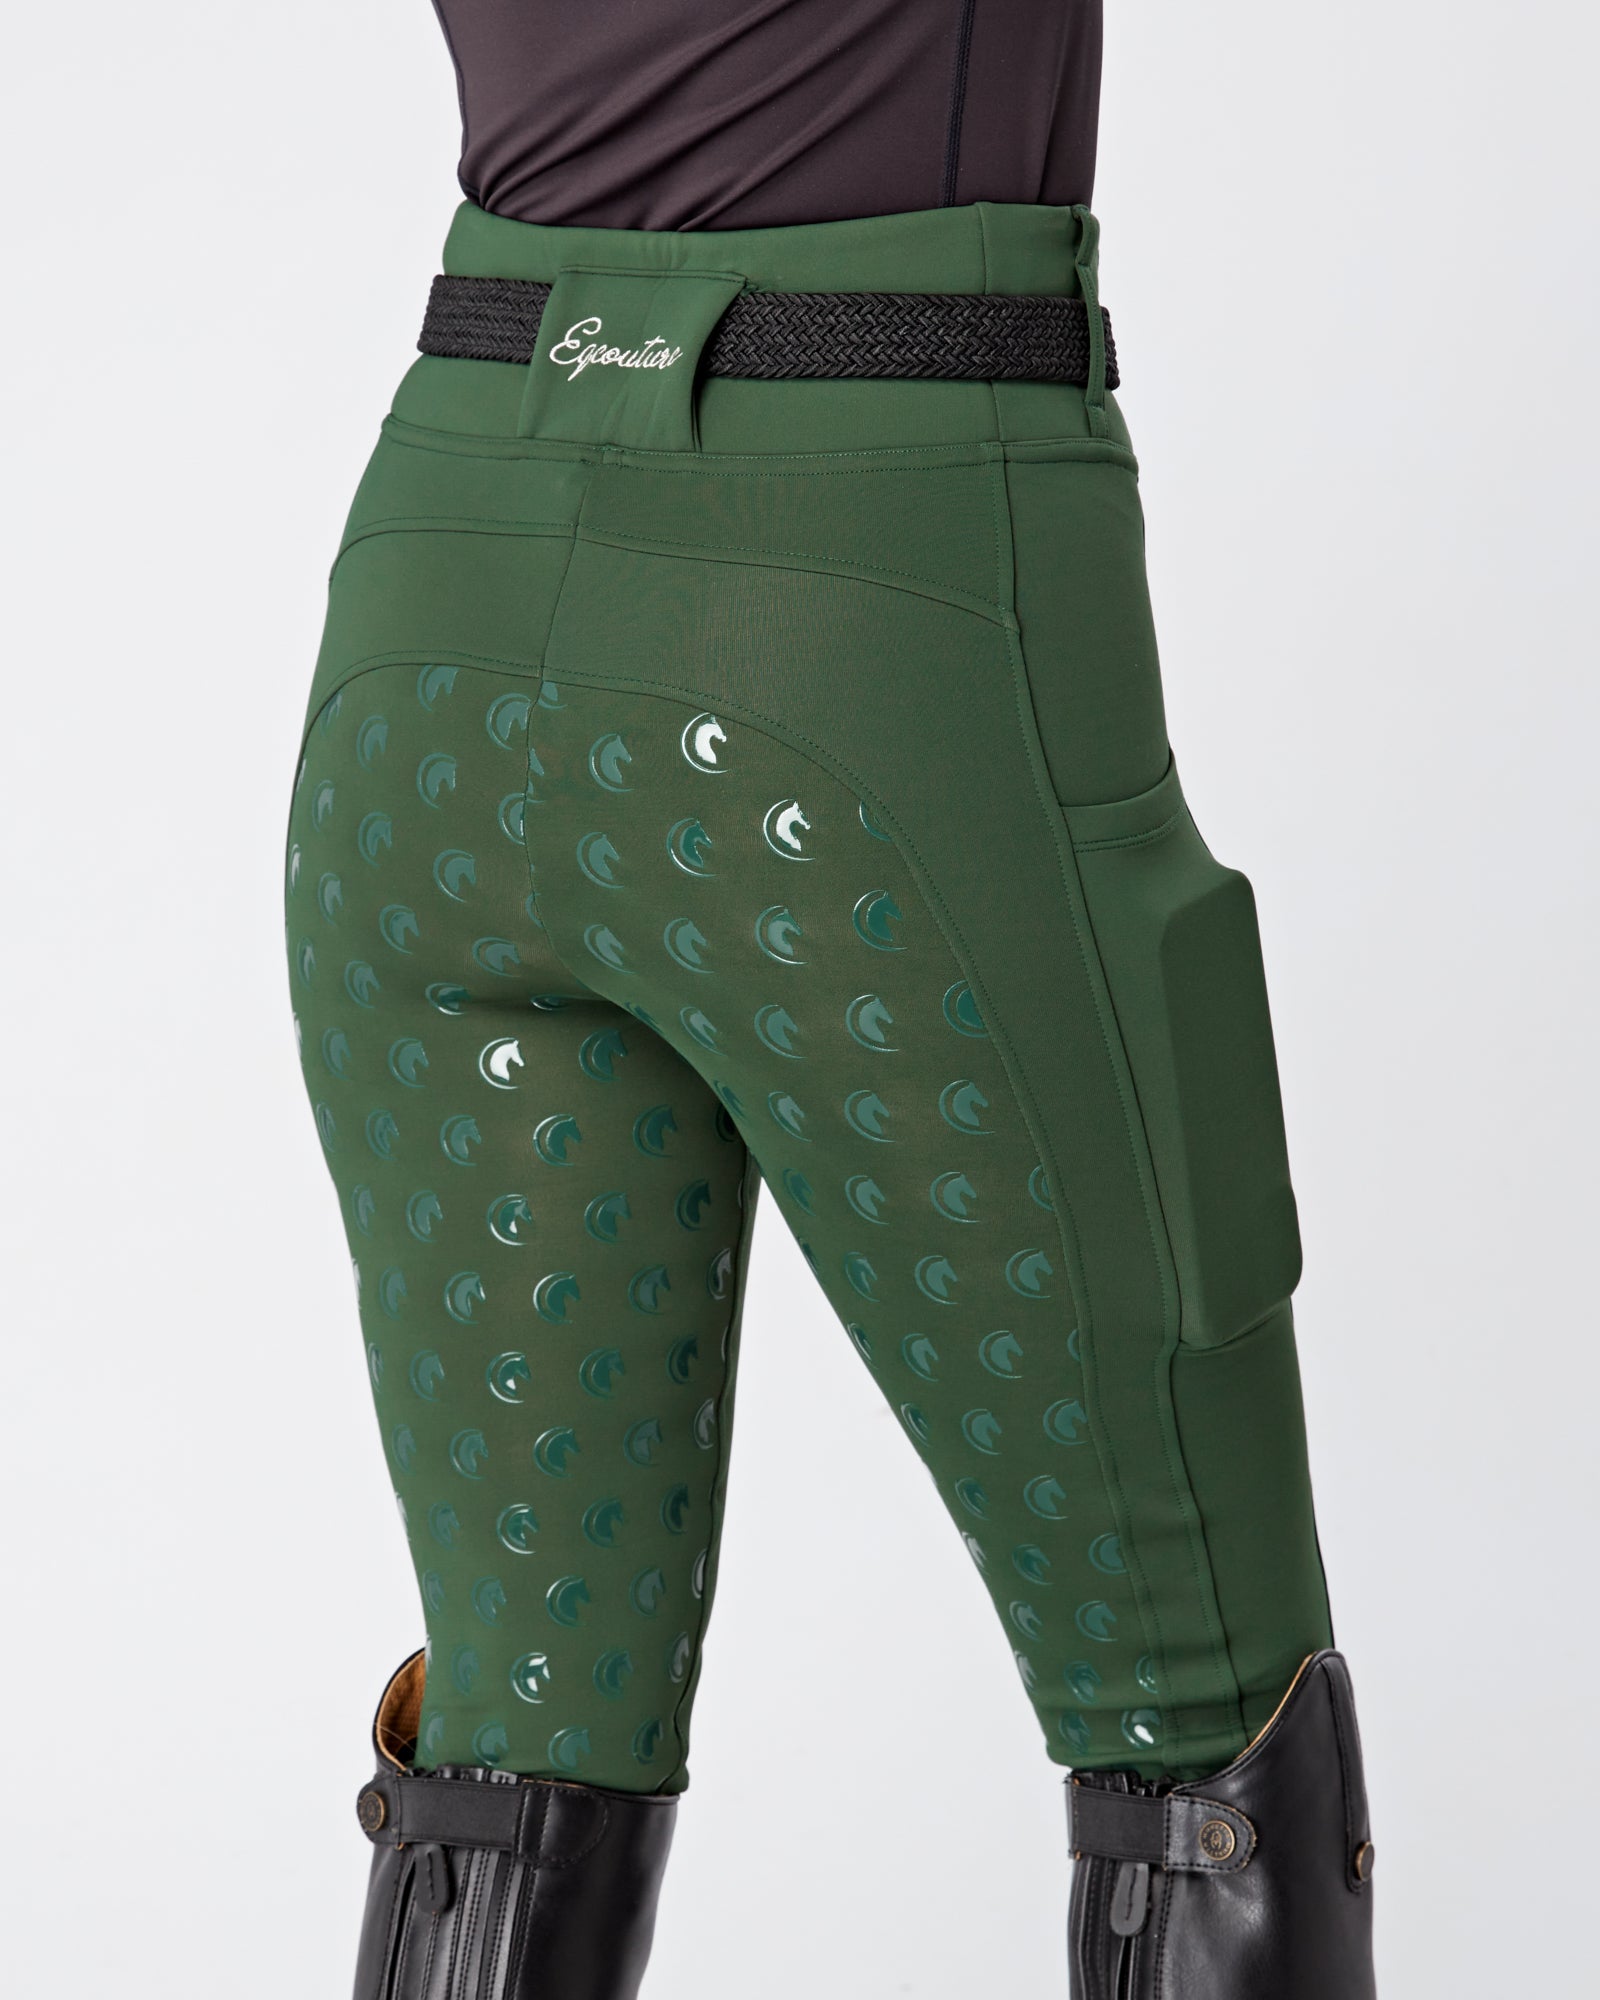 WINTER Thermal Forest Green Riding Leggings / Tights with Phone Pockets - WATER RESISTANT